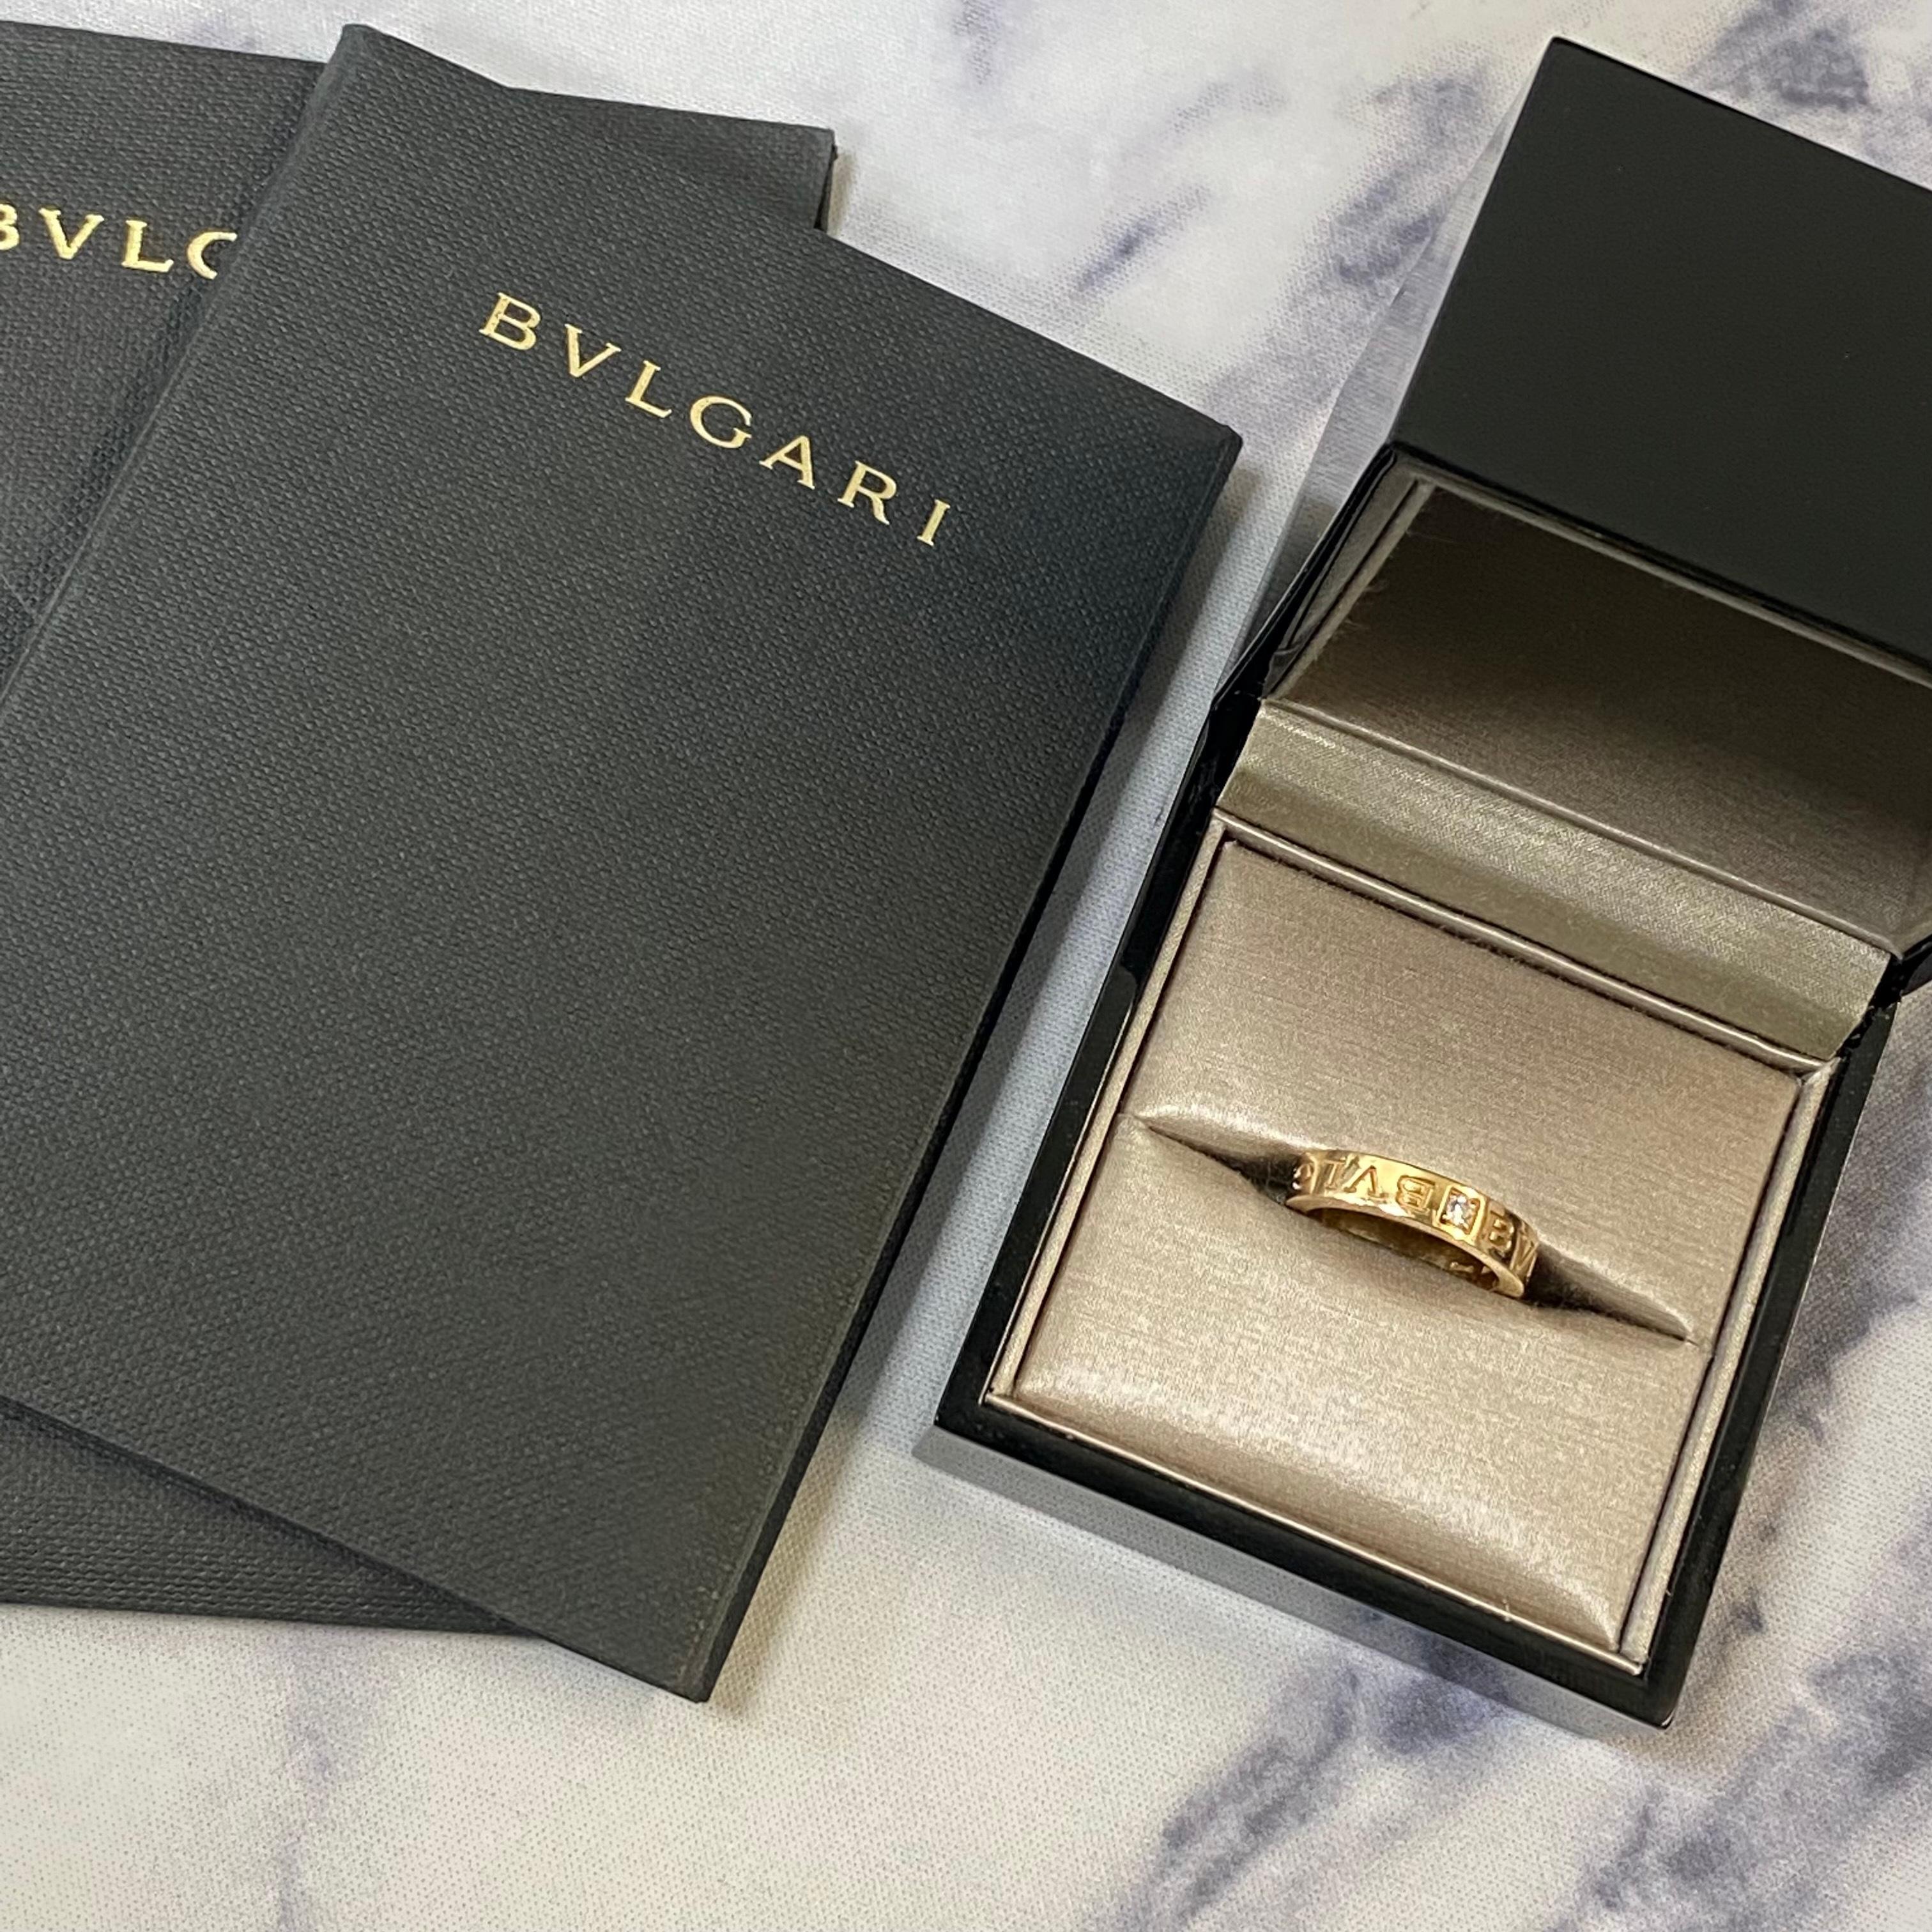 Bvlgari Diamond Ring 18K Rose Gold 0.04cttw Size 4.75 In Excellent Condition For Sale In New York, NY